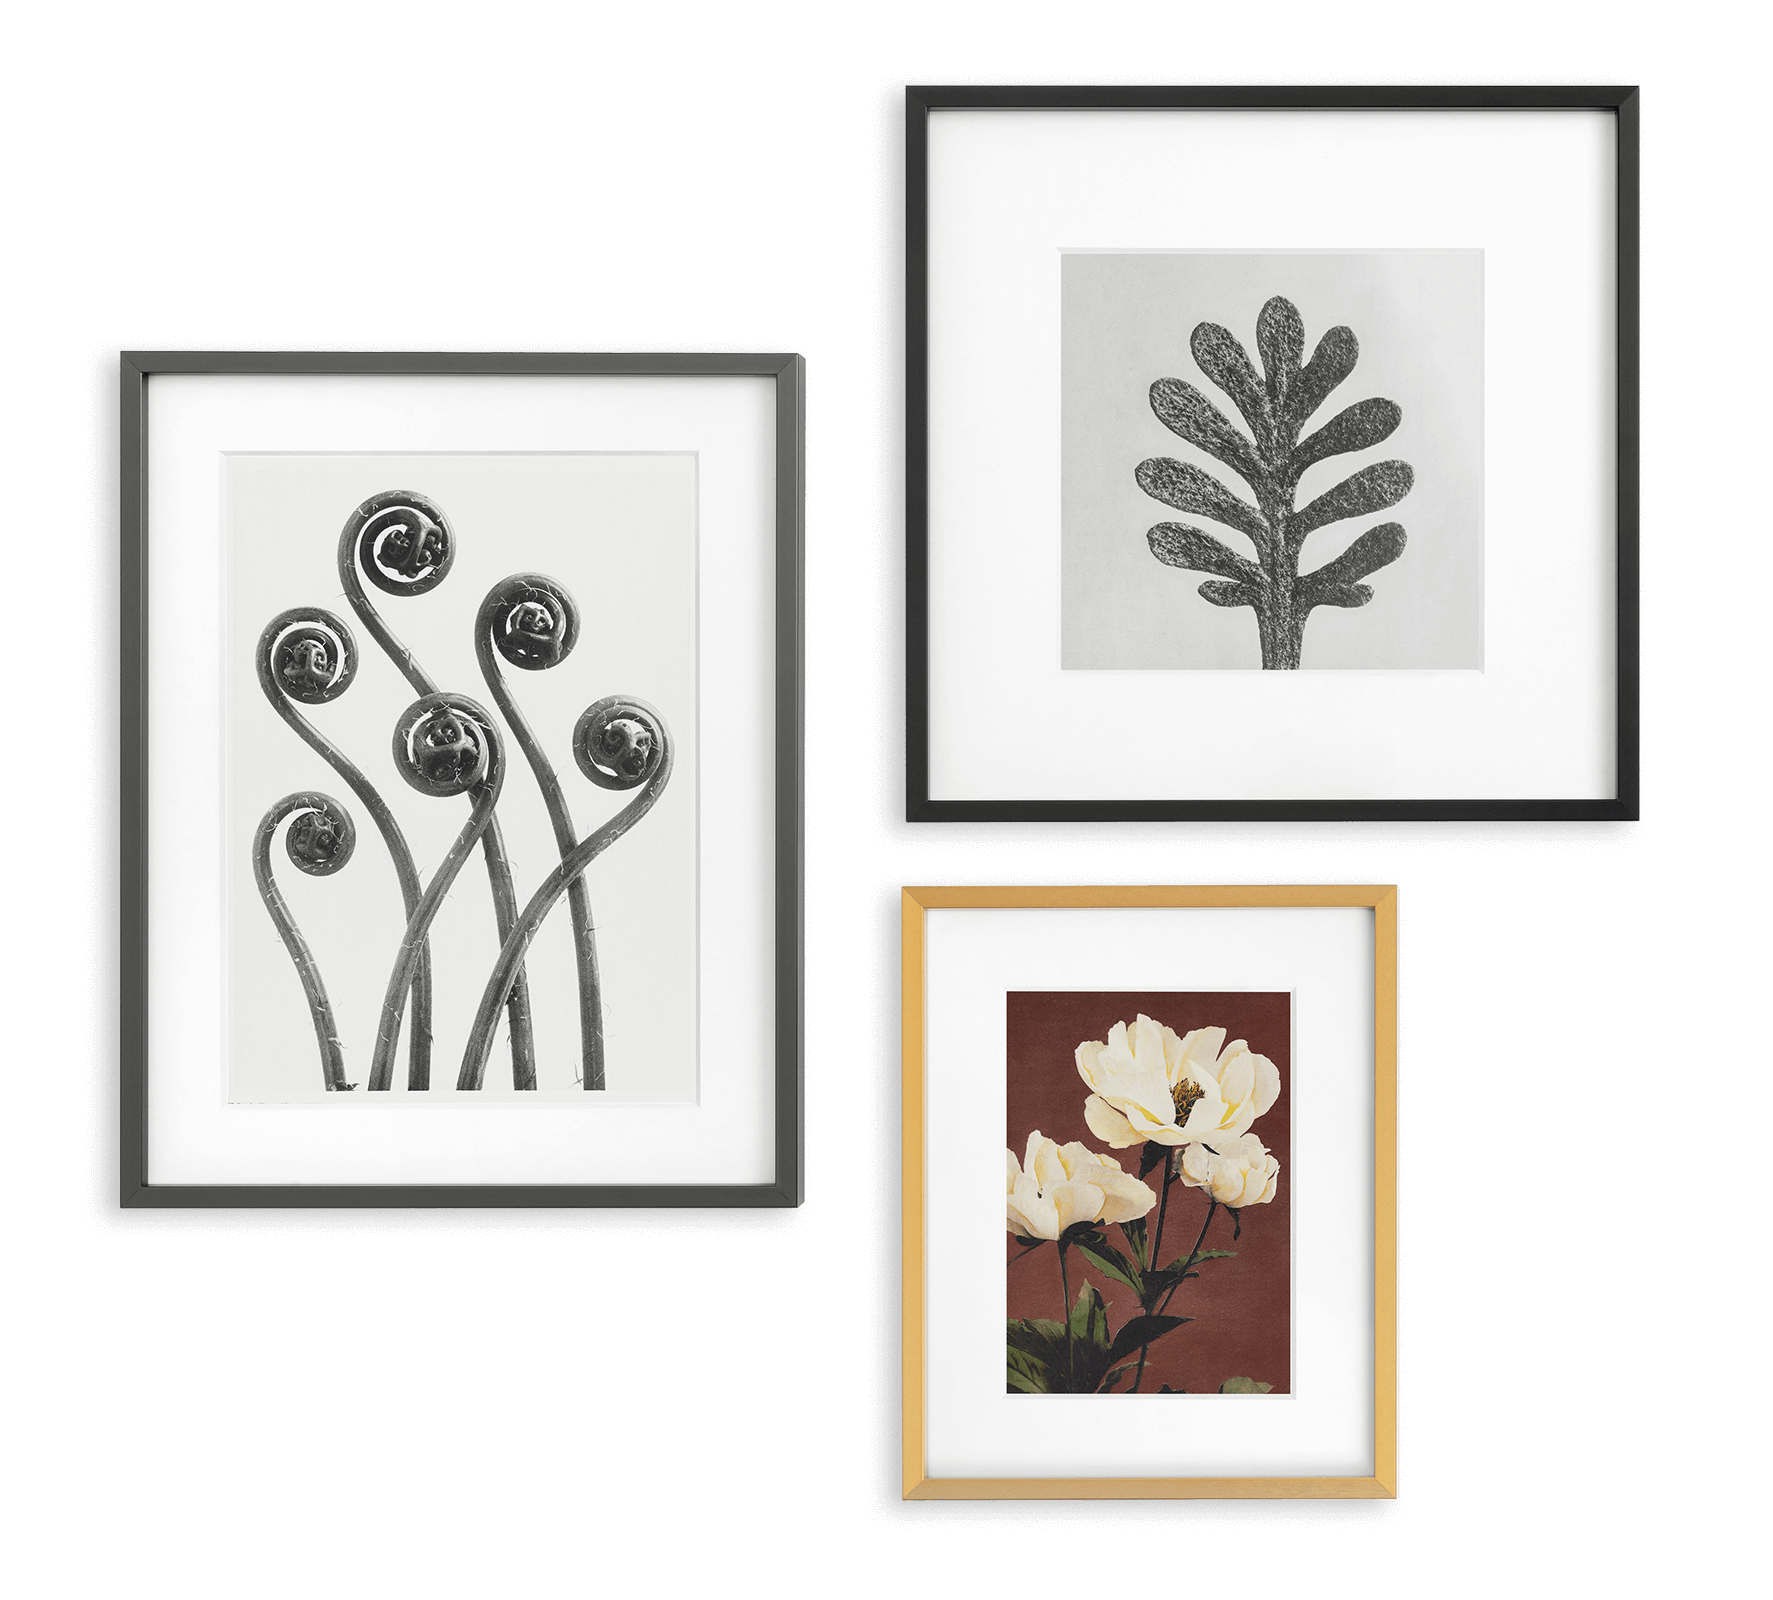 3 frames (2 black, 1 brass) with closeups of vintage botanicals like leafs and pansies